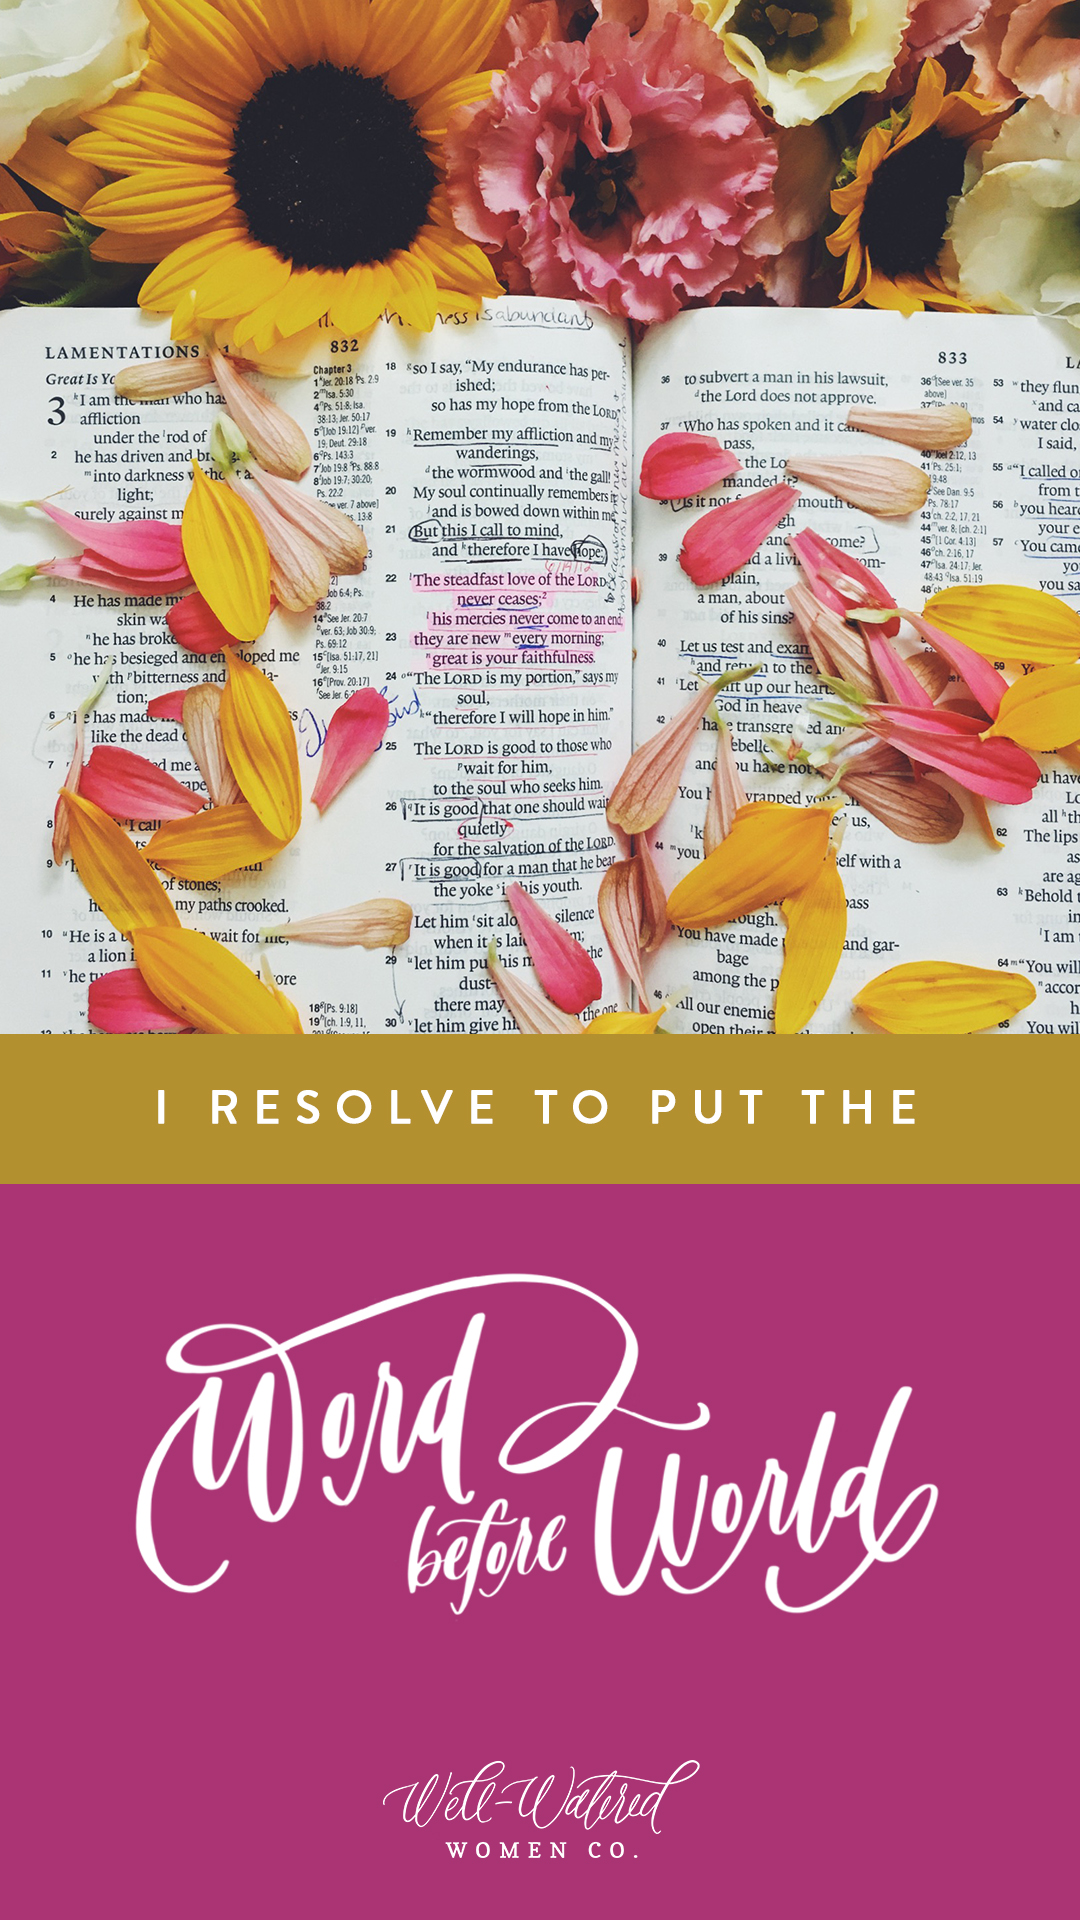 7 Day Kickstart Your Quiet Time Challenge by Well-Watered Women - a free challenge to help you put the Word before the world!